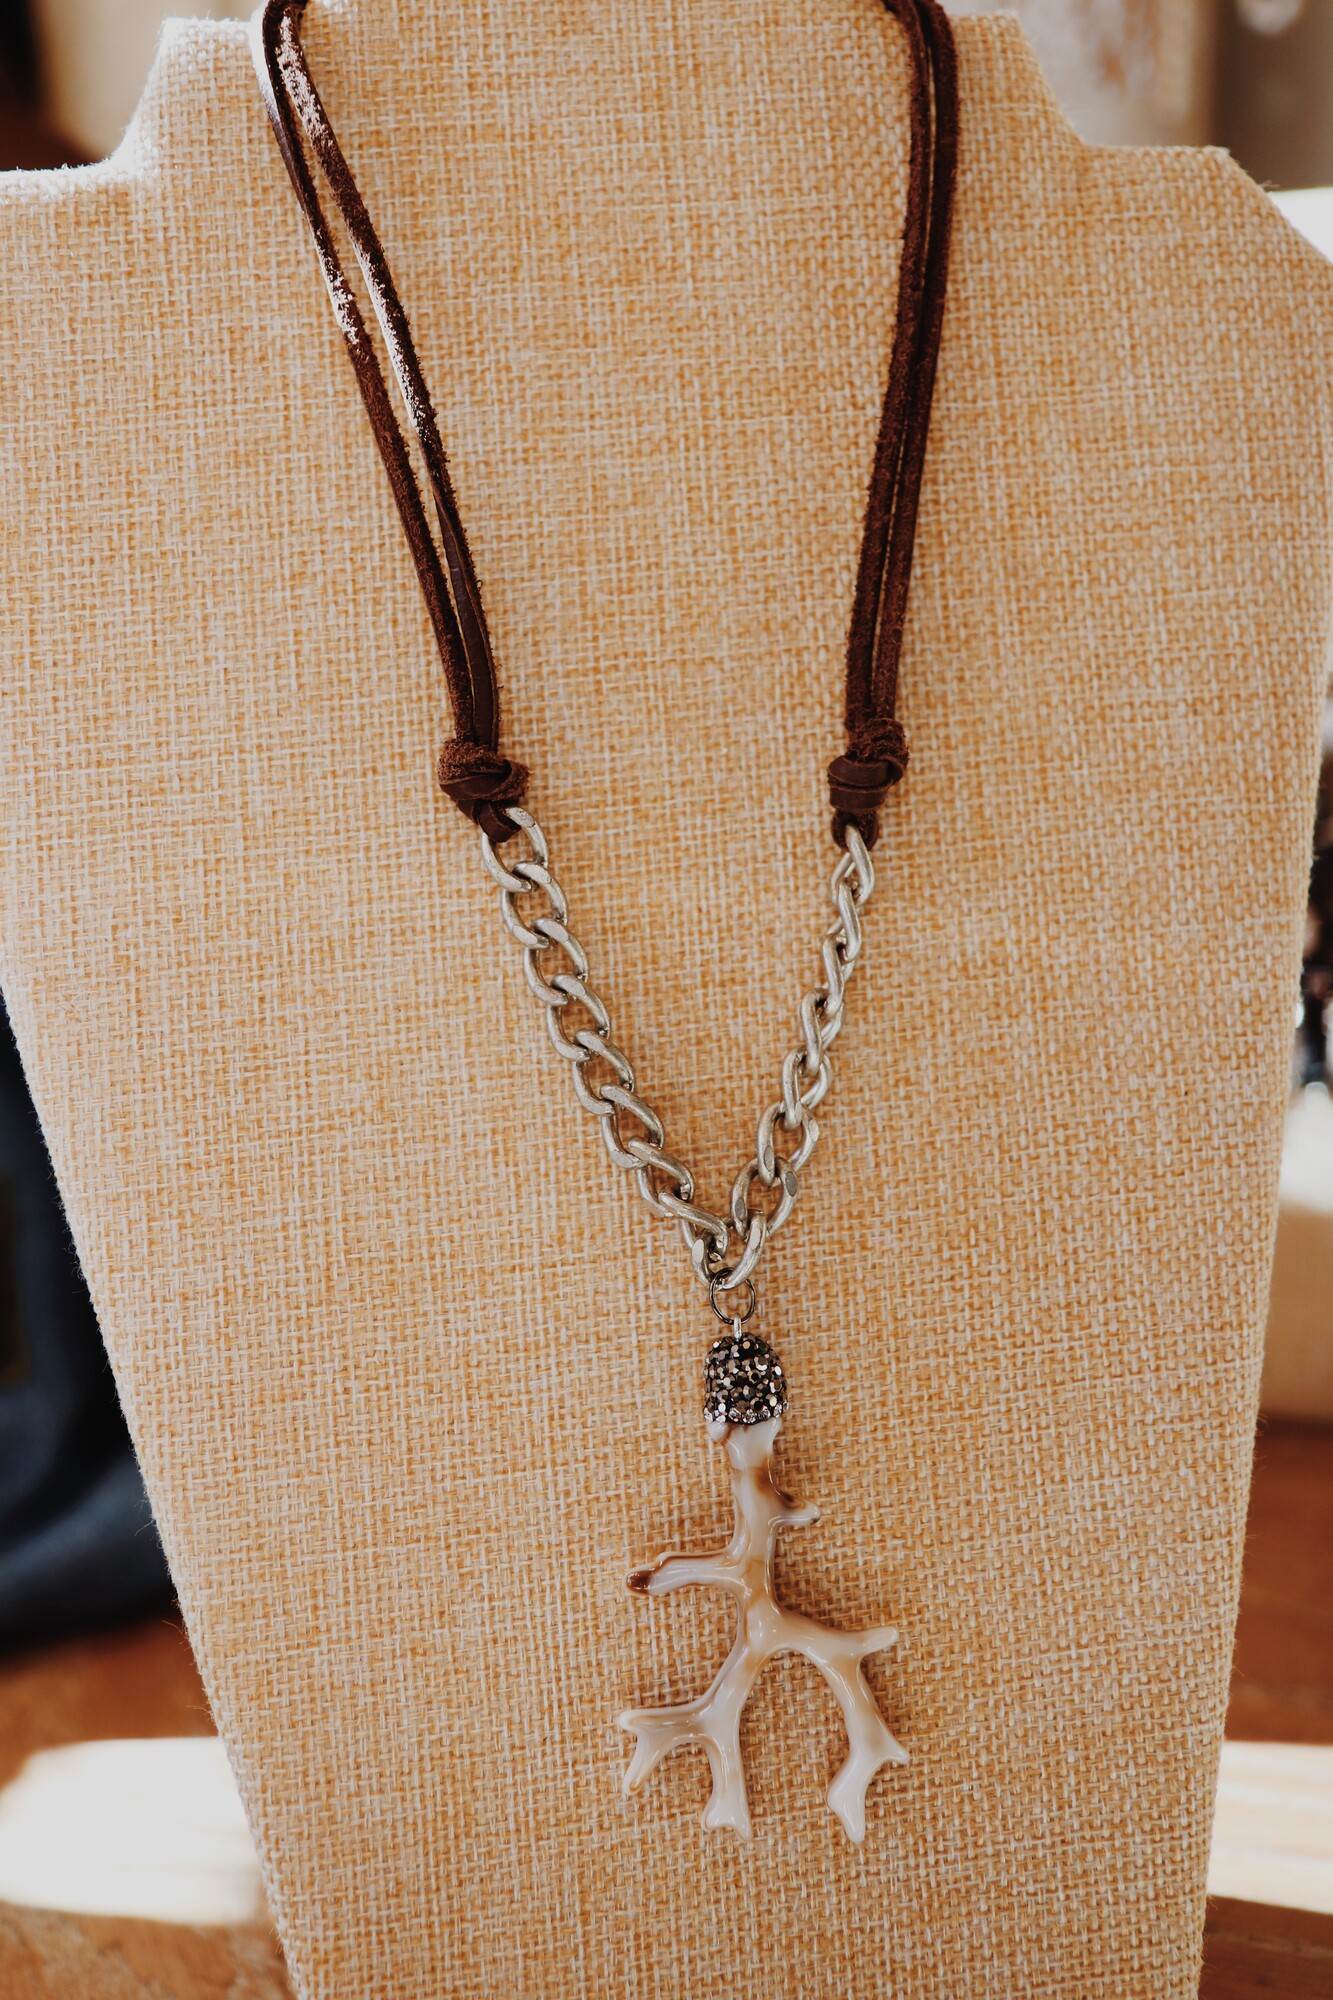 This handmade Kelli Hawk Designs necklace is on an 18 inch chain that transitions from leather cording to a silver chunky chain. The pendant is an adorable little antler!